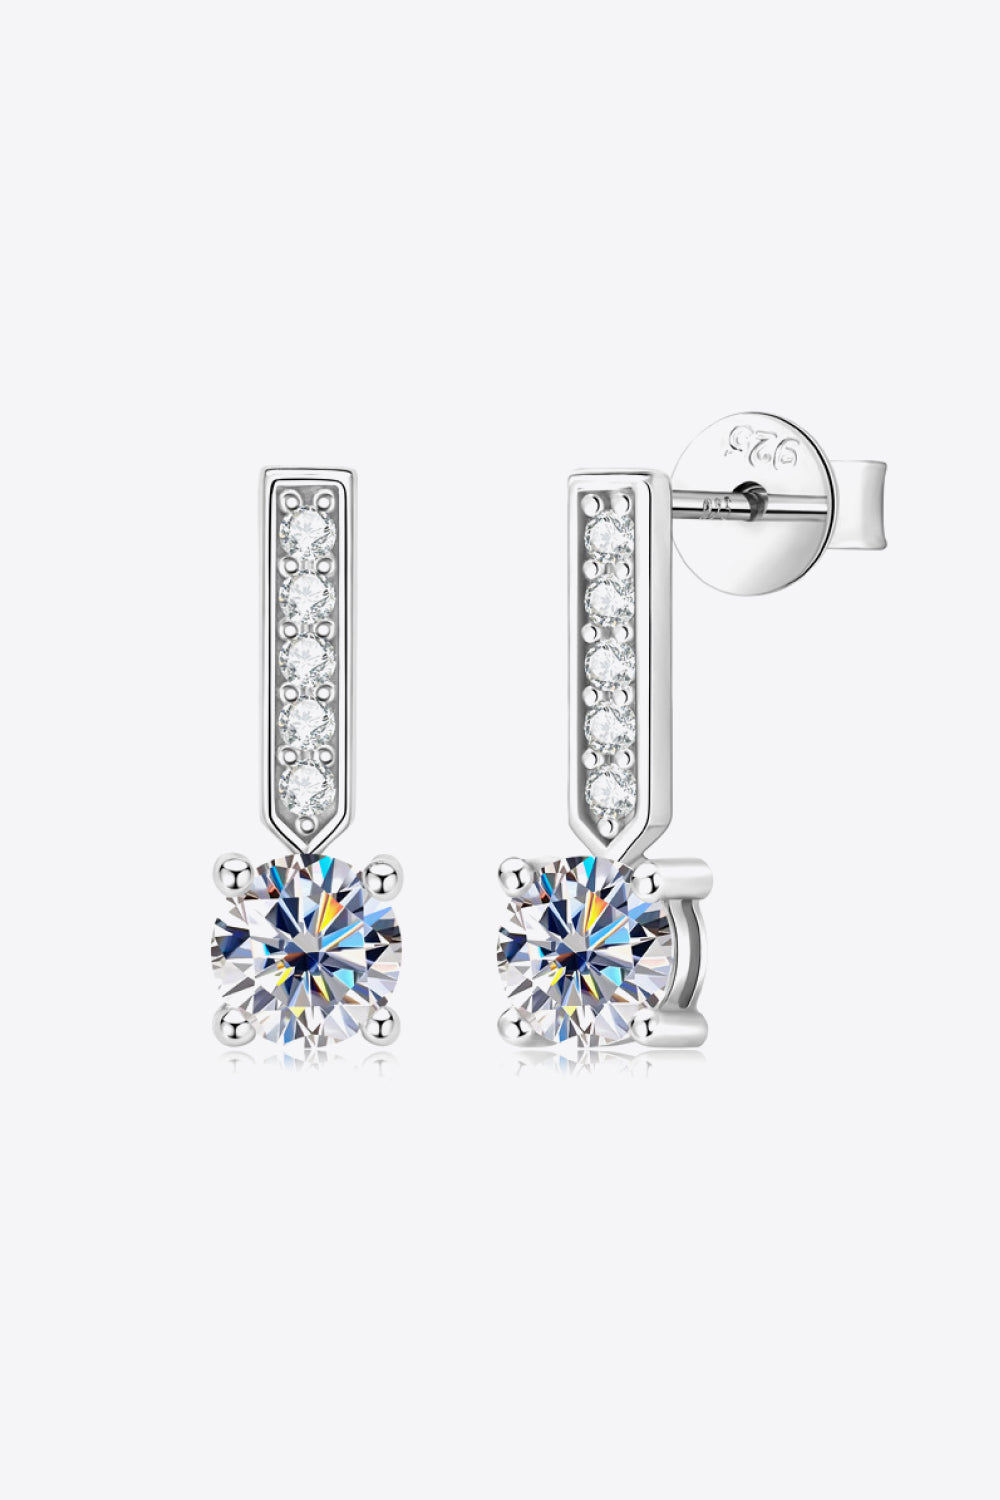 SILVER ONE SIZE - Moissanite and Zircon 925 Sterling Silver Drop Earrings - earrings at TFC&H Co.